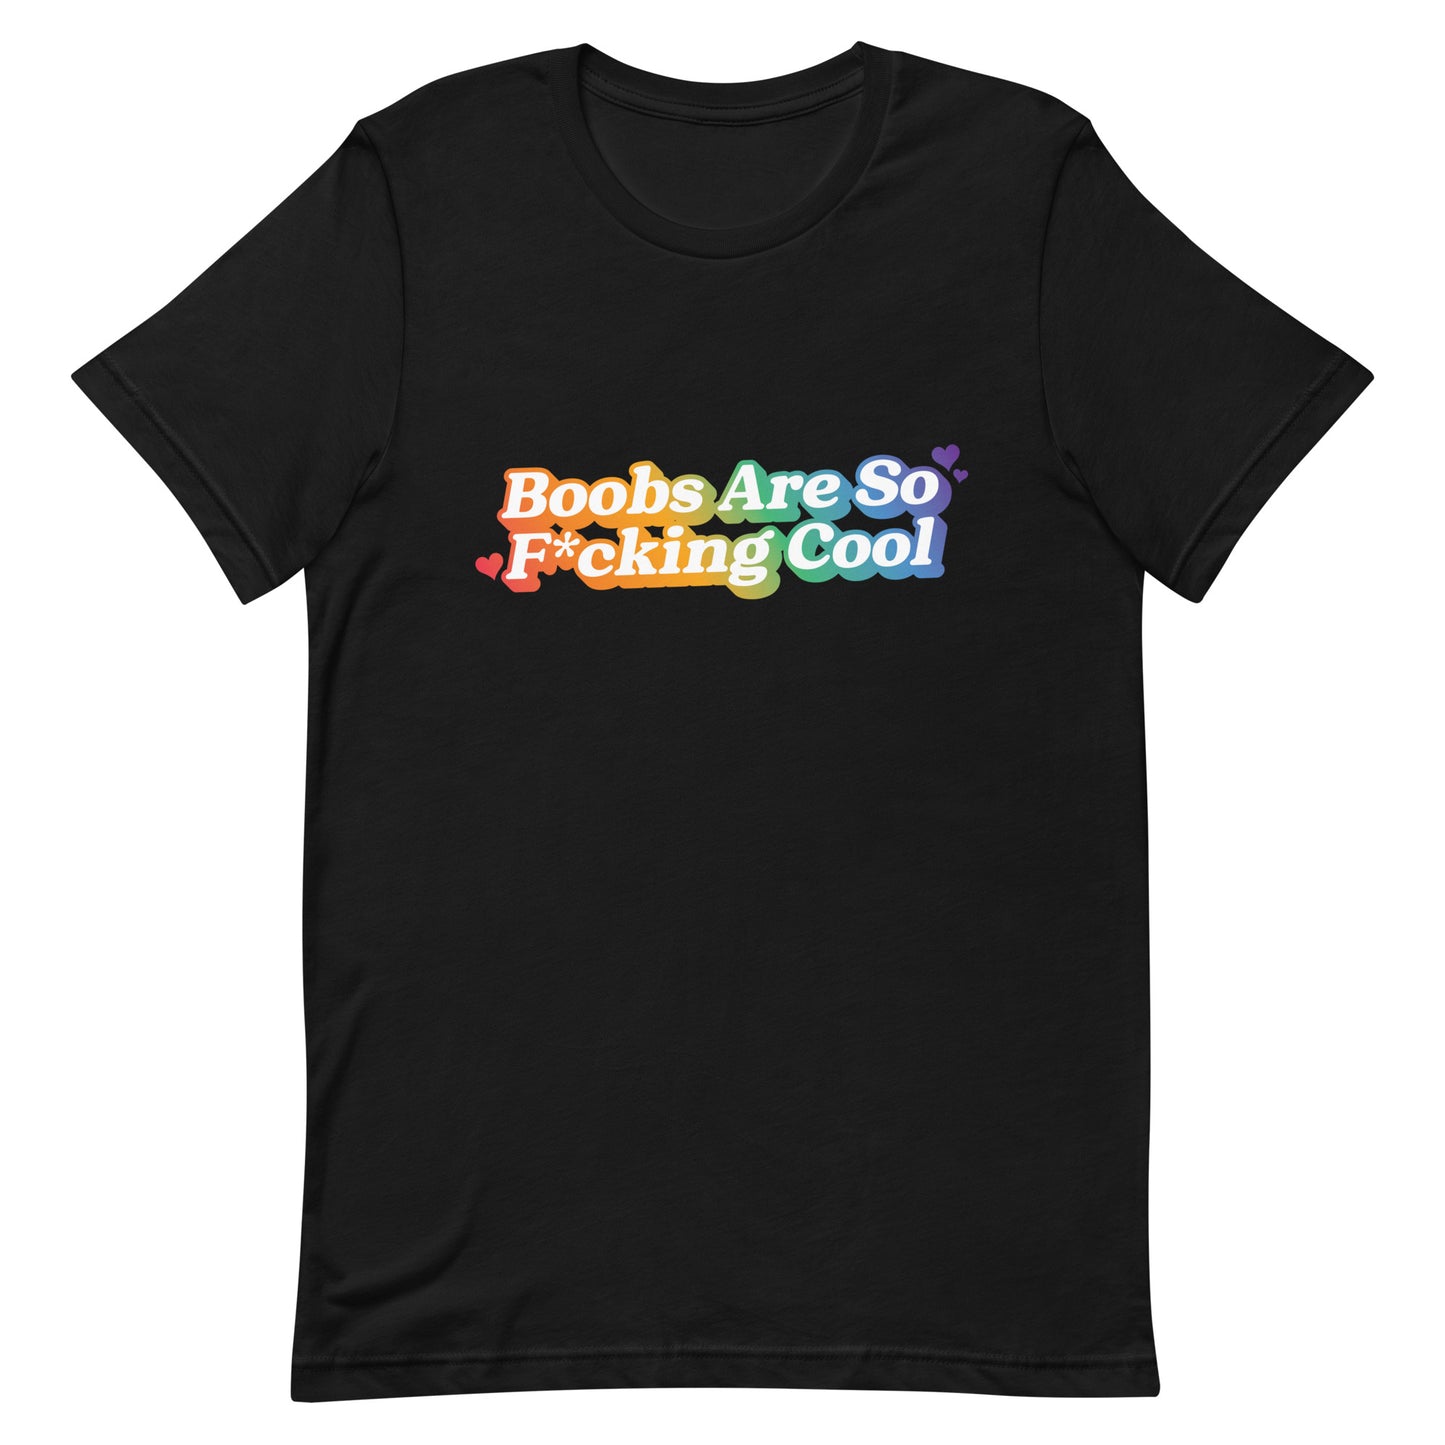 Boobs Are So F*cking Cool (Rainbow) Unisex t-shirt